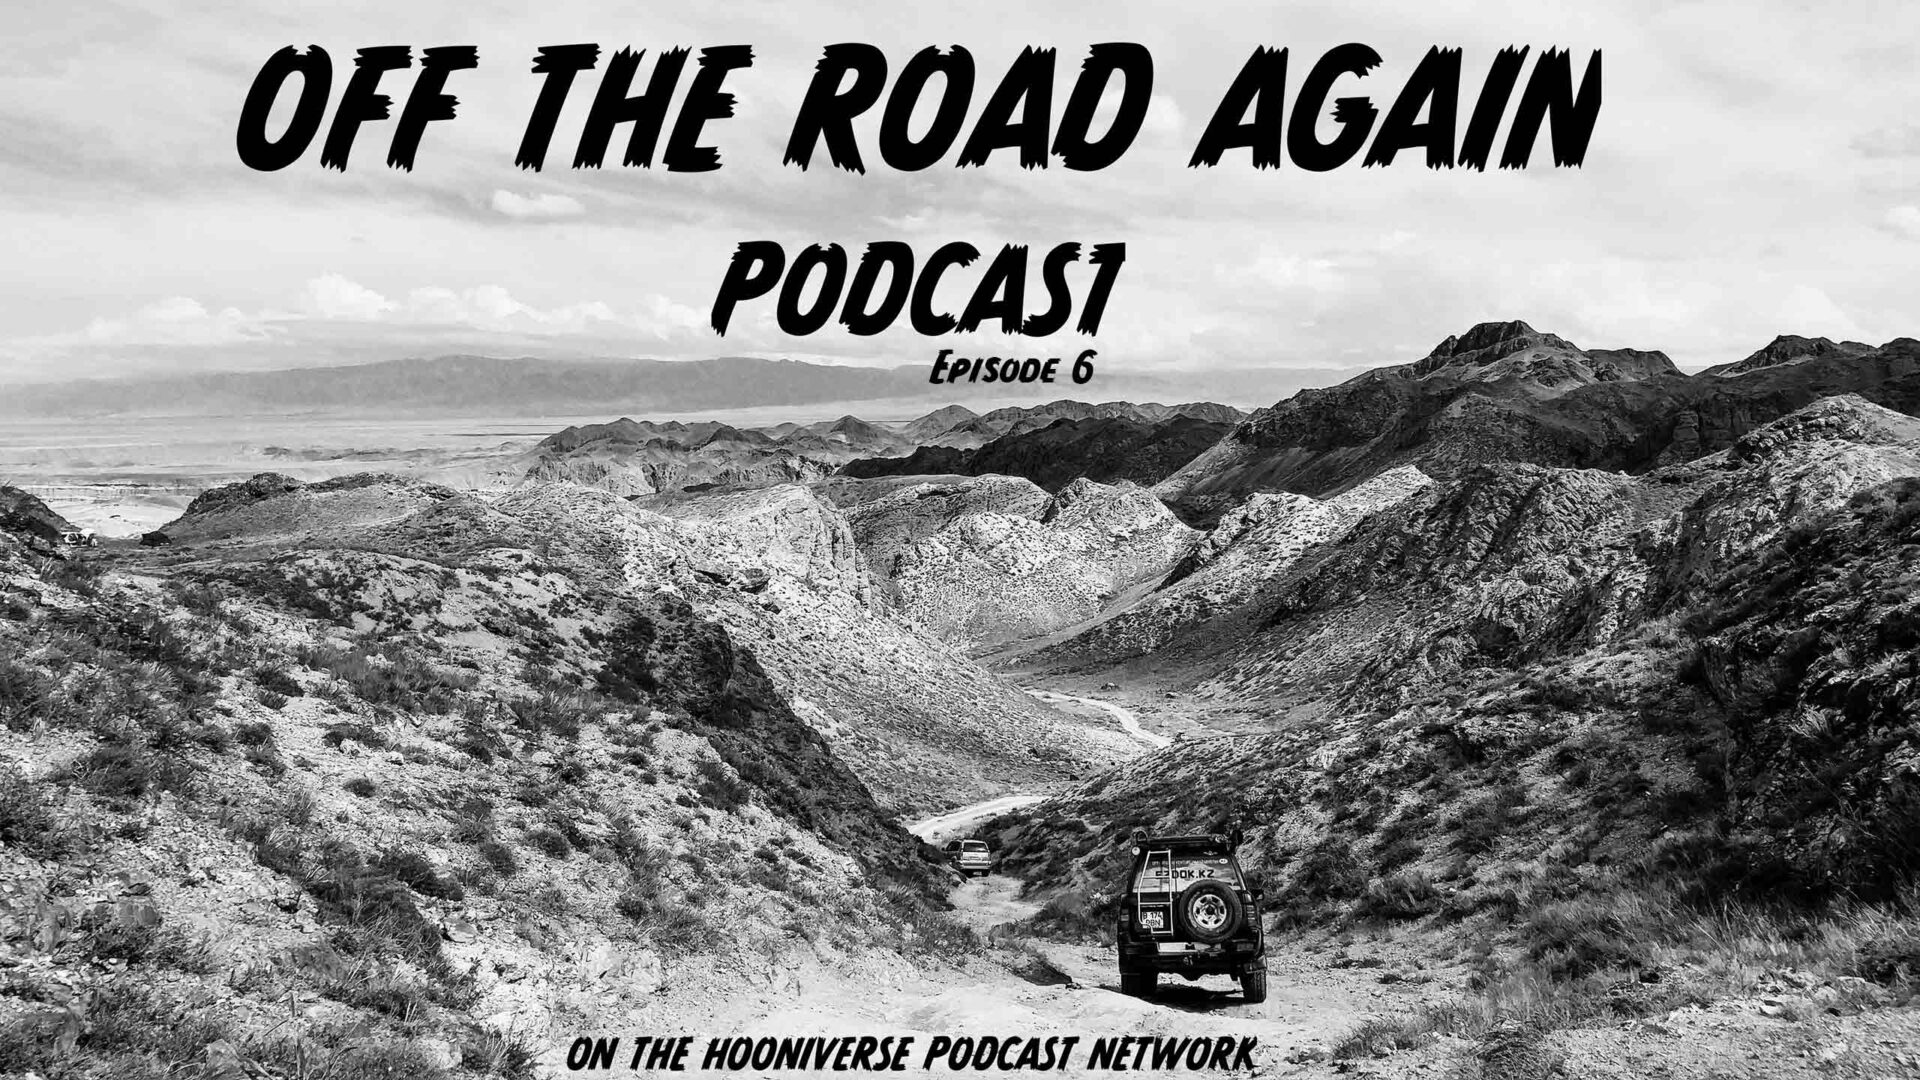 Off the Road Again Podcast Episode 6